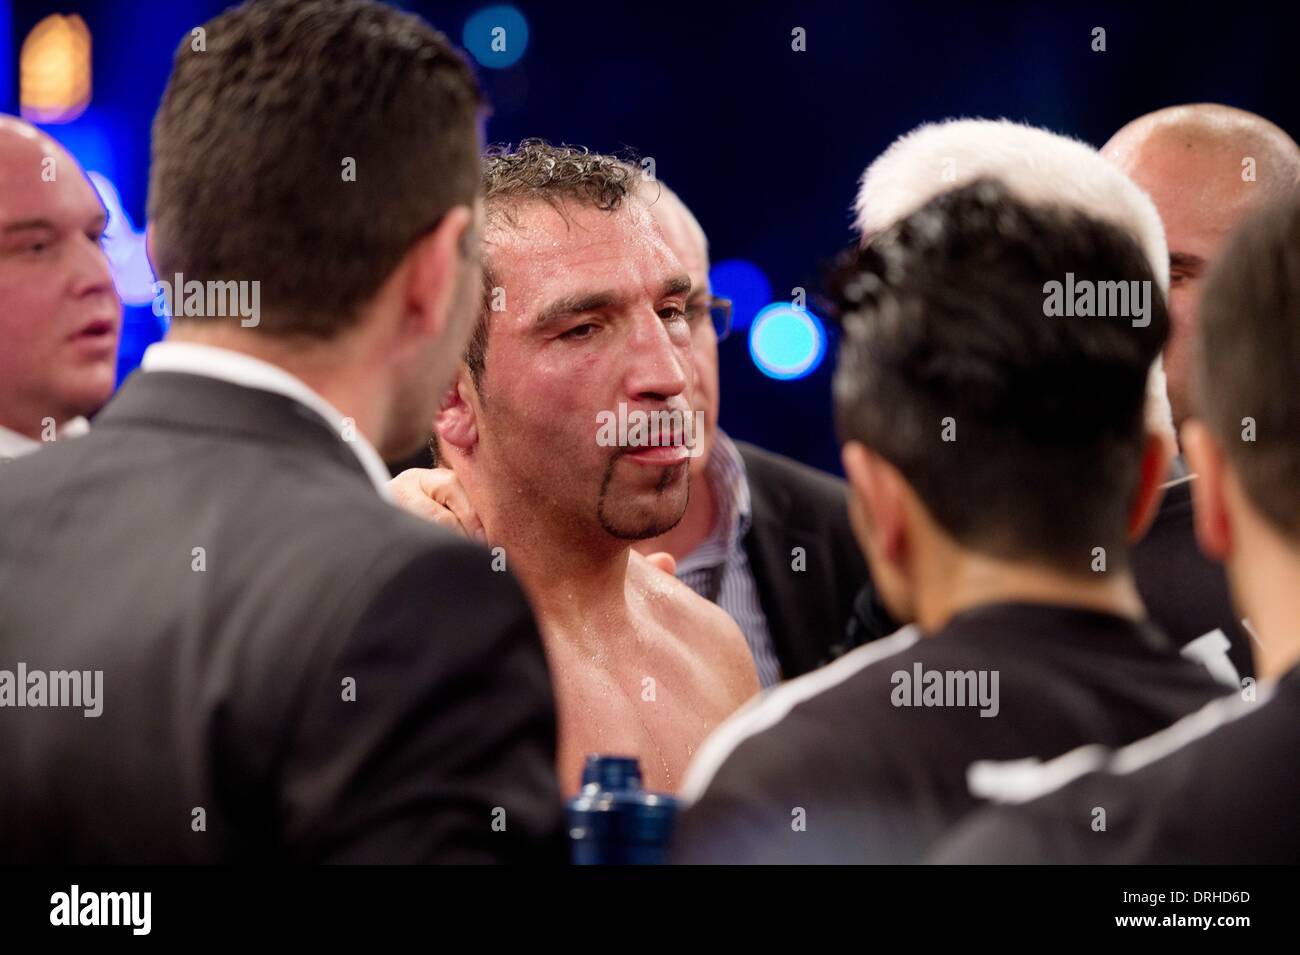 Stuttgart, Germany. 26th Jan, 2014. German boxer Firat Arslan reacts after loosing against Marco Huck in their World boxing Organization (WBO) Cruiserweight Championship match at Schleyer Hall in Stuttgart, Germany, 26 January 2014. Challenger Firat Arslan lost by technical k.o. in the sixth round. Photo: SEBASTIAN KAHNERT/dpa/Alamy Live News Stock Photo